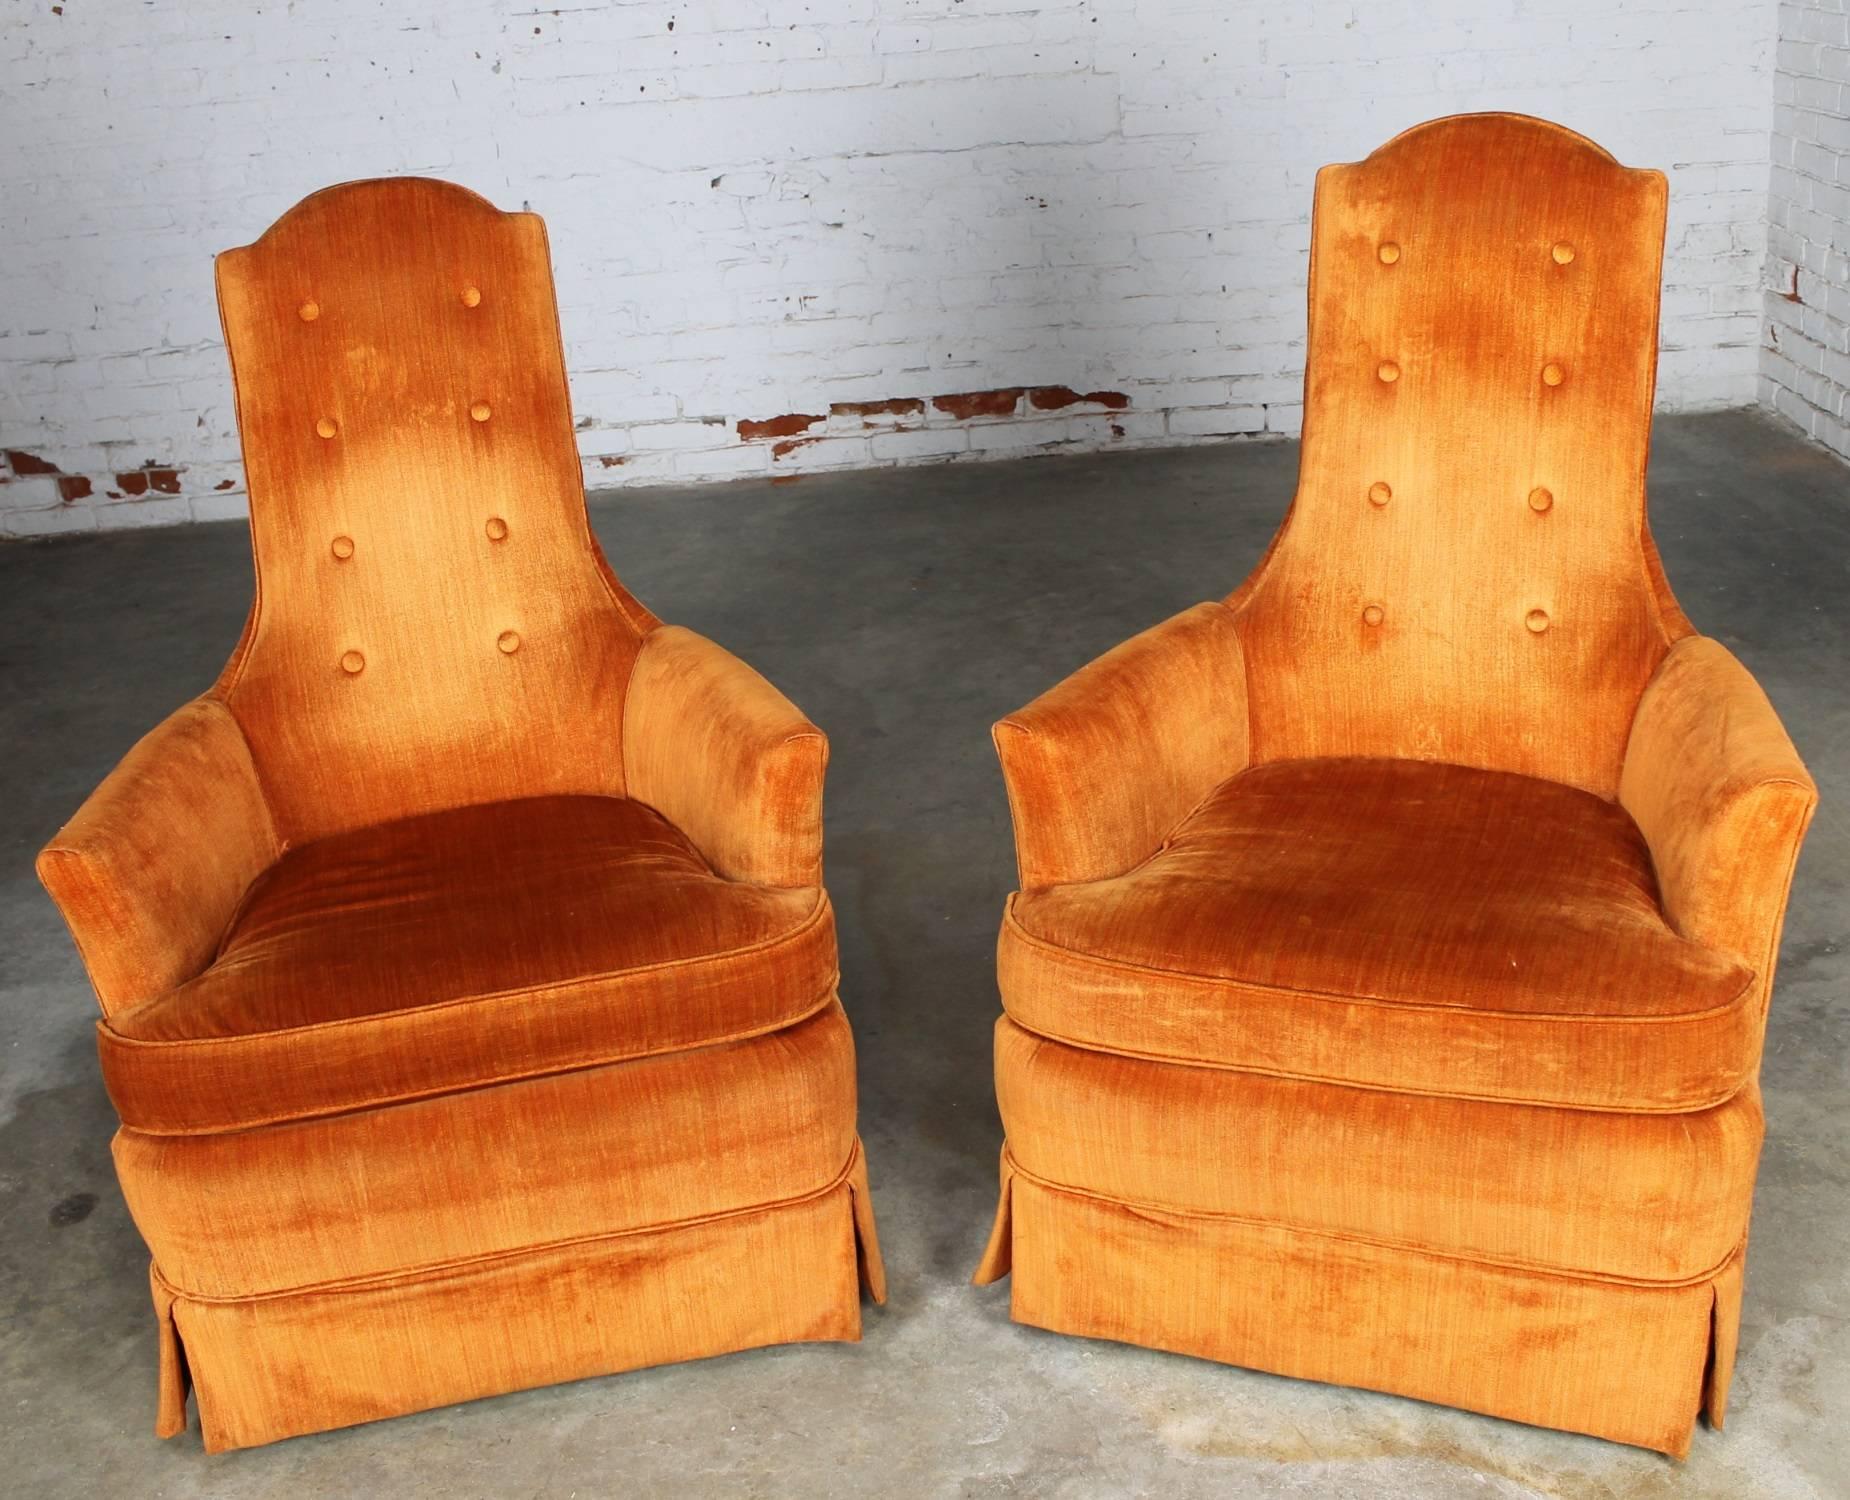 Outrageously orange velvet high back pair of vintage Hollywood Regency Style chairs by Perfection Furniture. Beautiful condition, keeping in mind that these are vintage and not new so will have signs of use and wear. They are in very good vintage